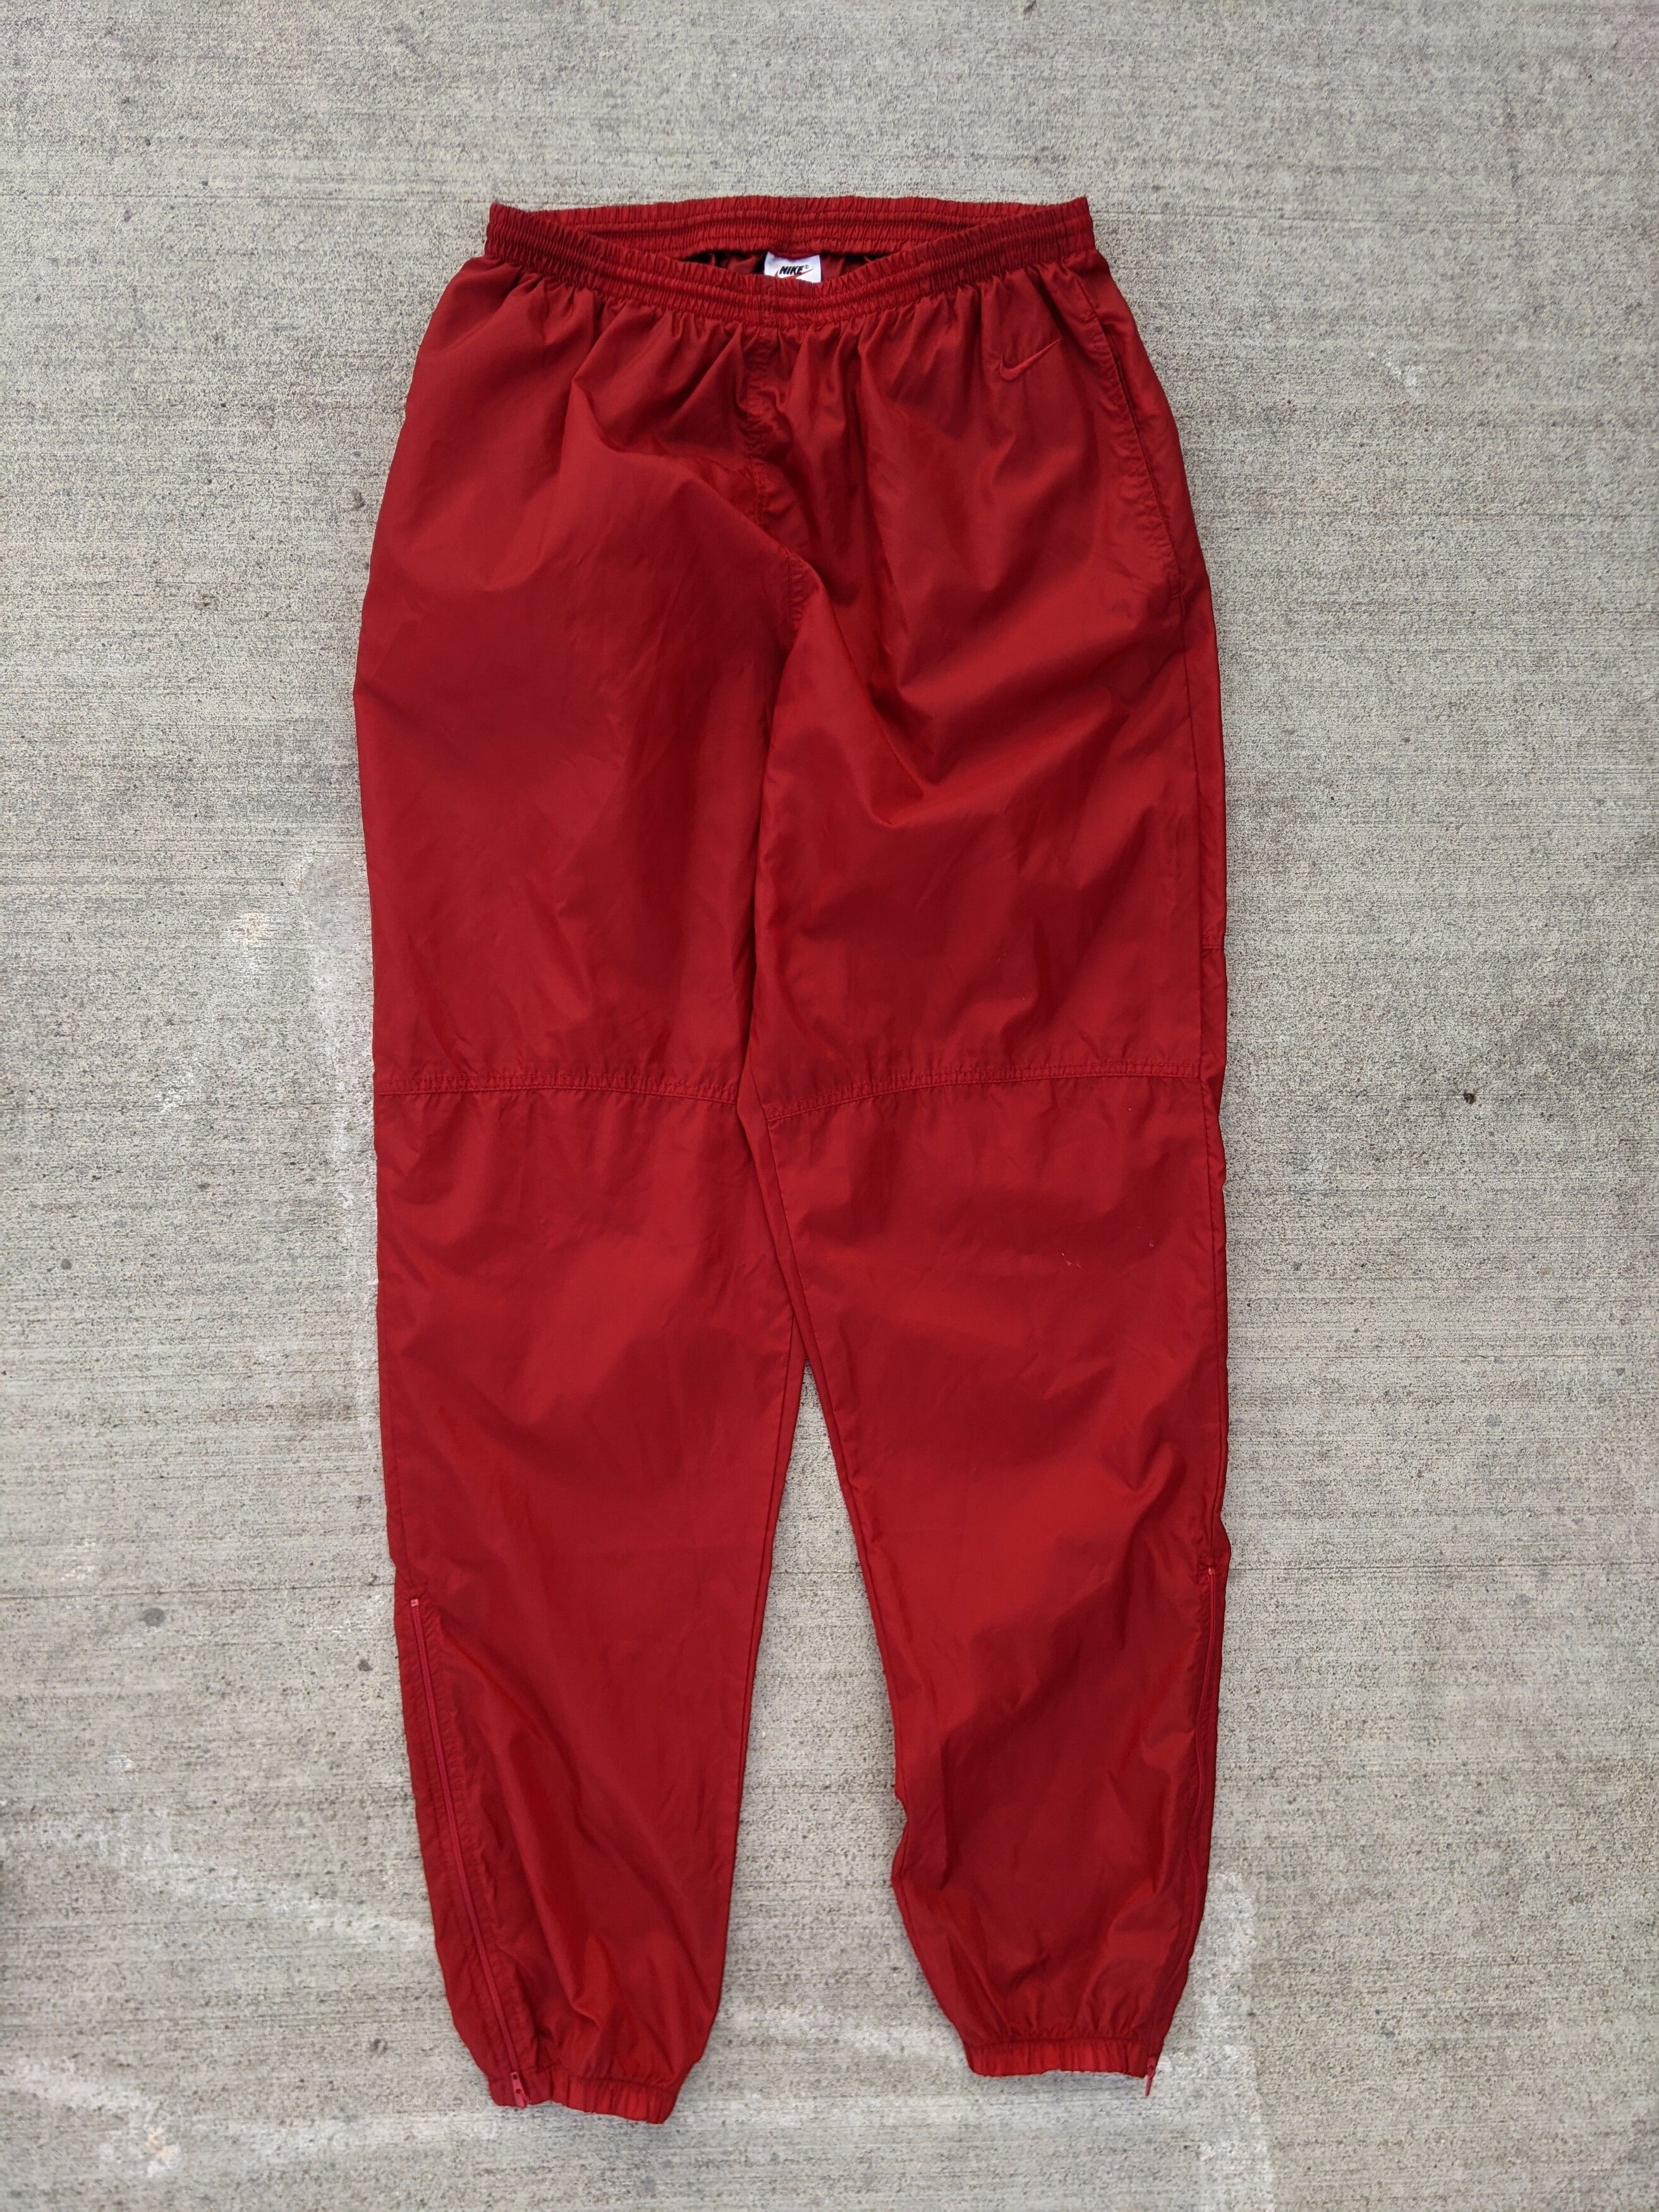 Pre-owned Nike X Vintage Nike 90' Drill Nylon Pants Red Embroidered Swoosh Size L-xl